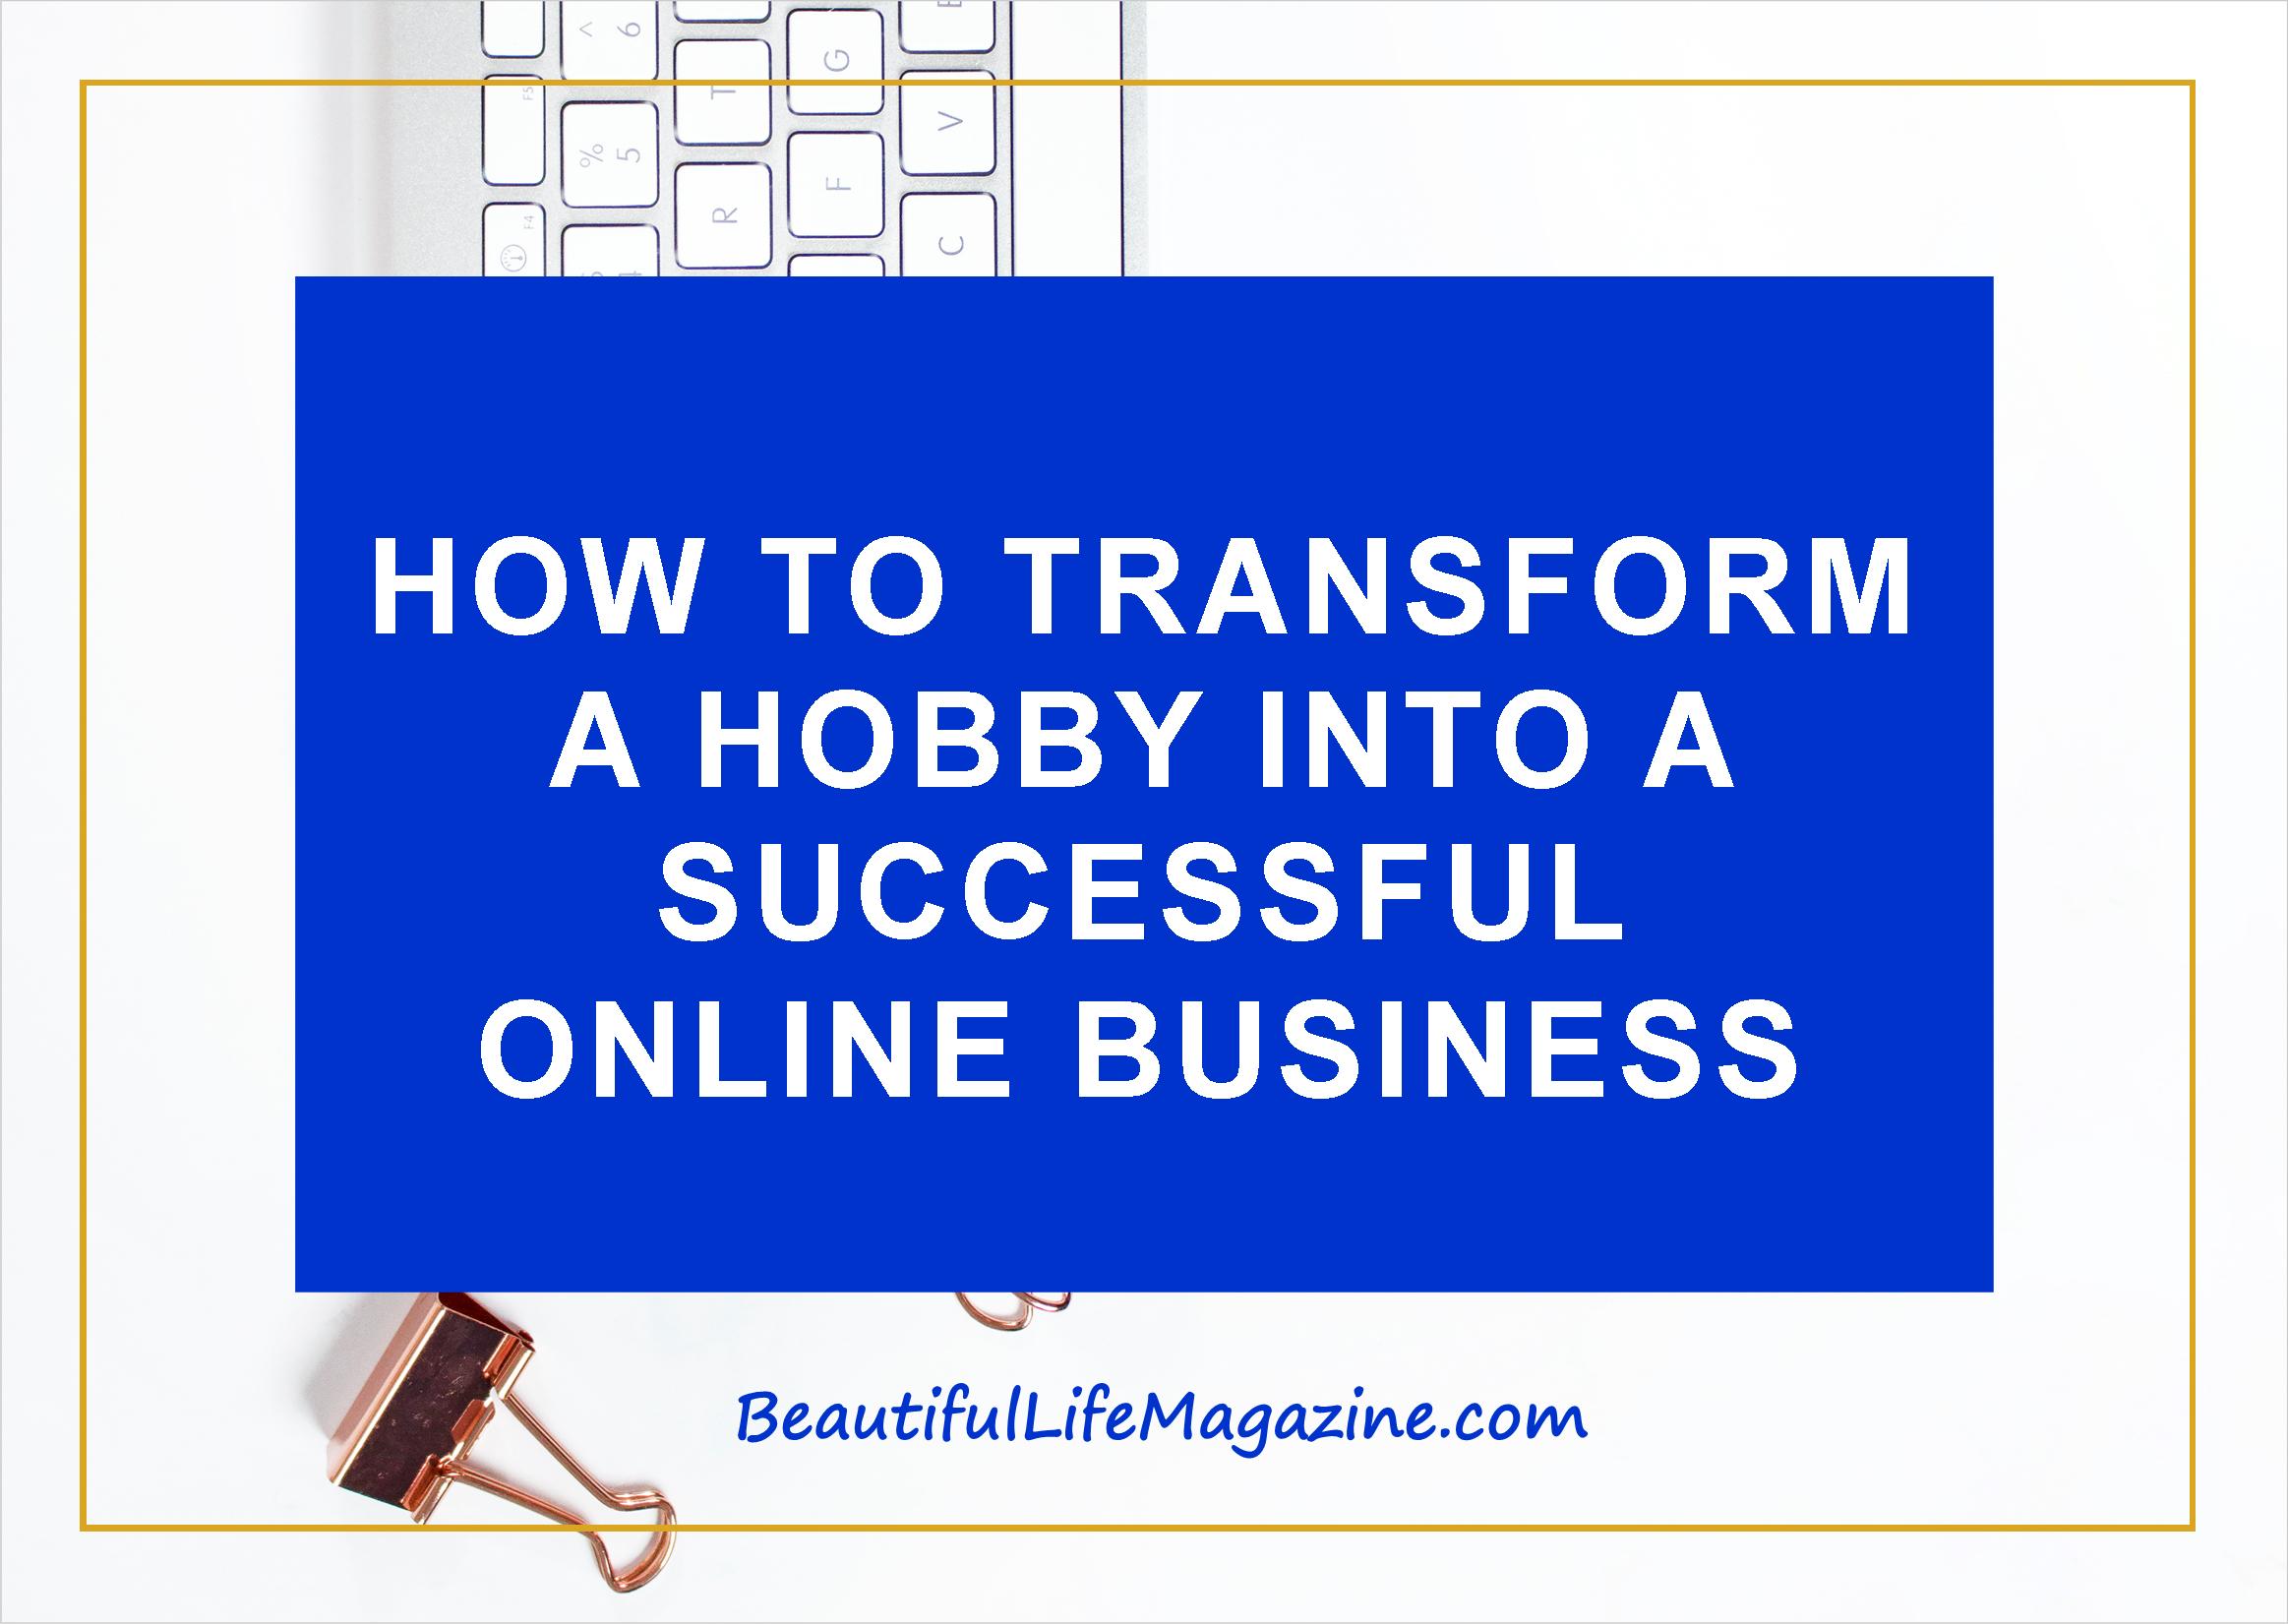 Blogging has become one of the first ways to creating an online business. We break down the 10 first steps to getting you from hobby to online business.